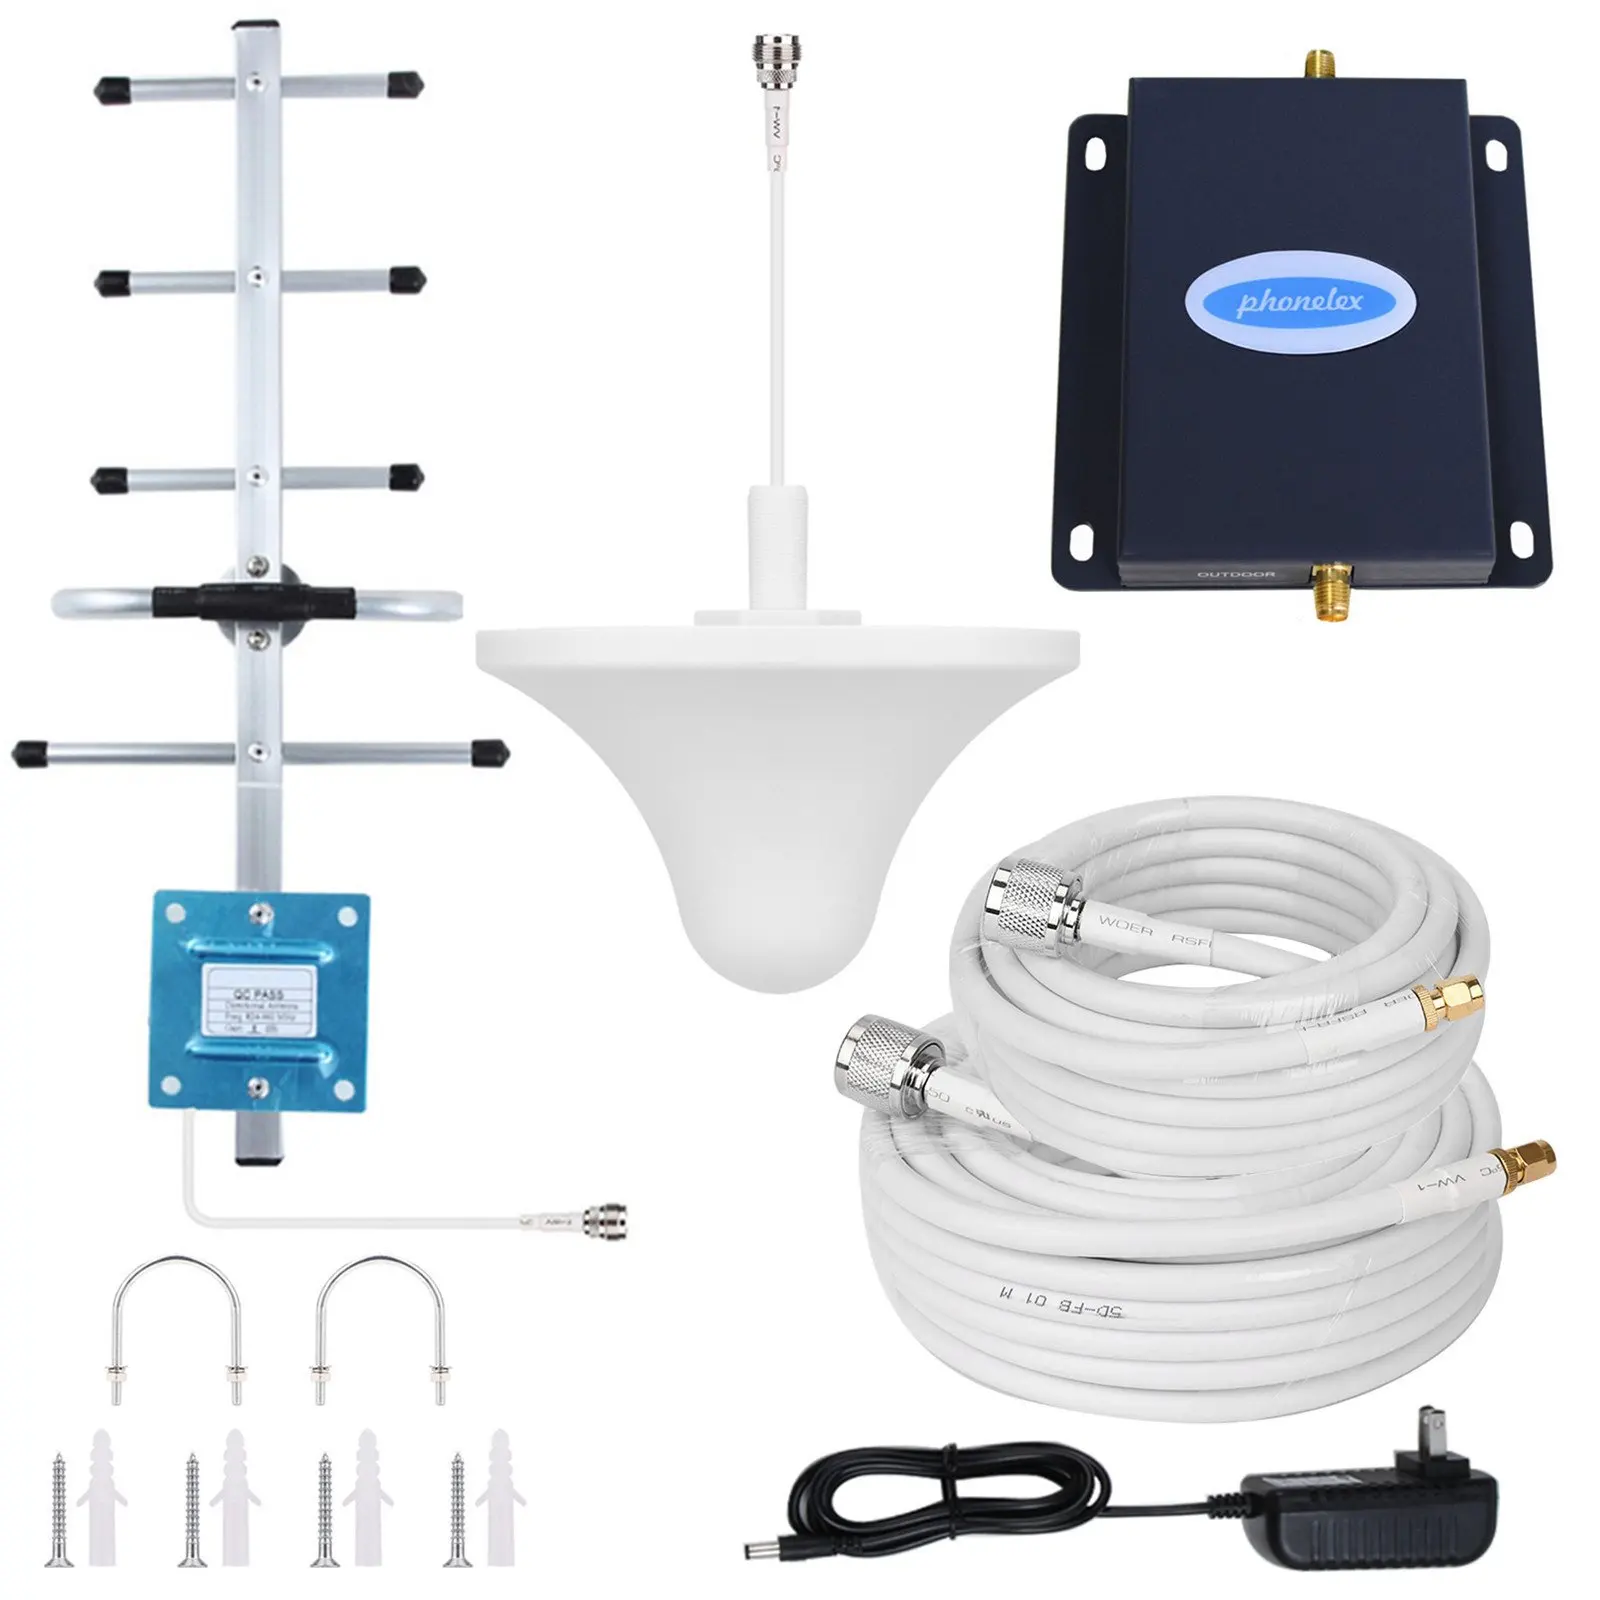 4g lte signal booster for cell phone at home